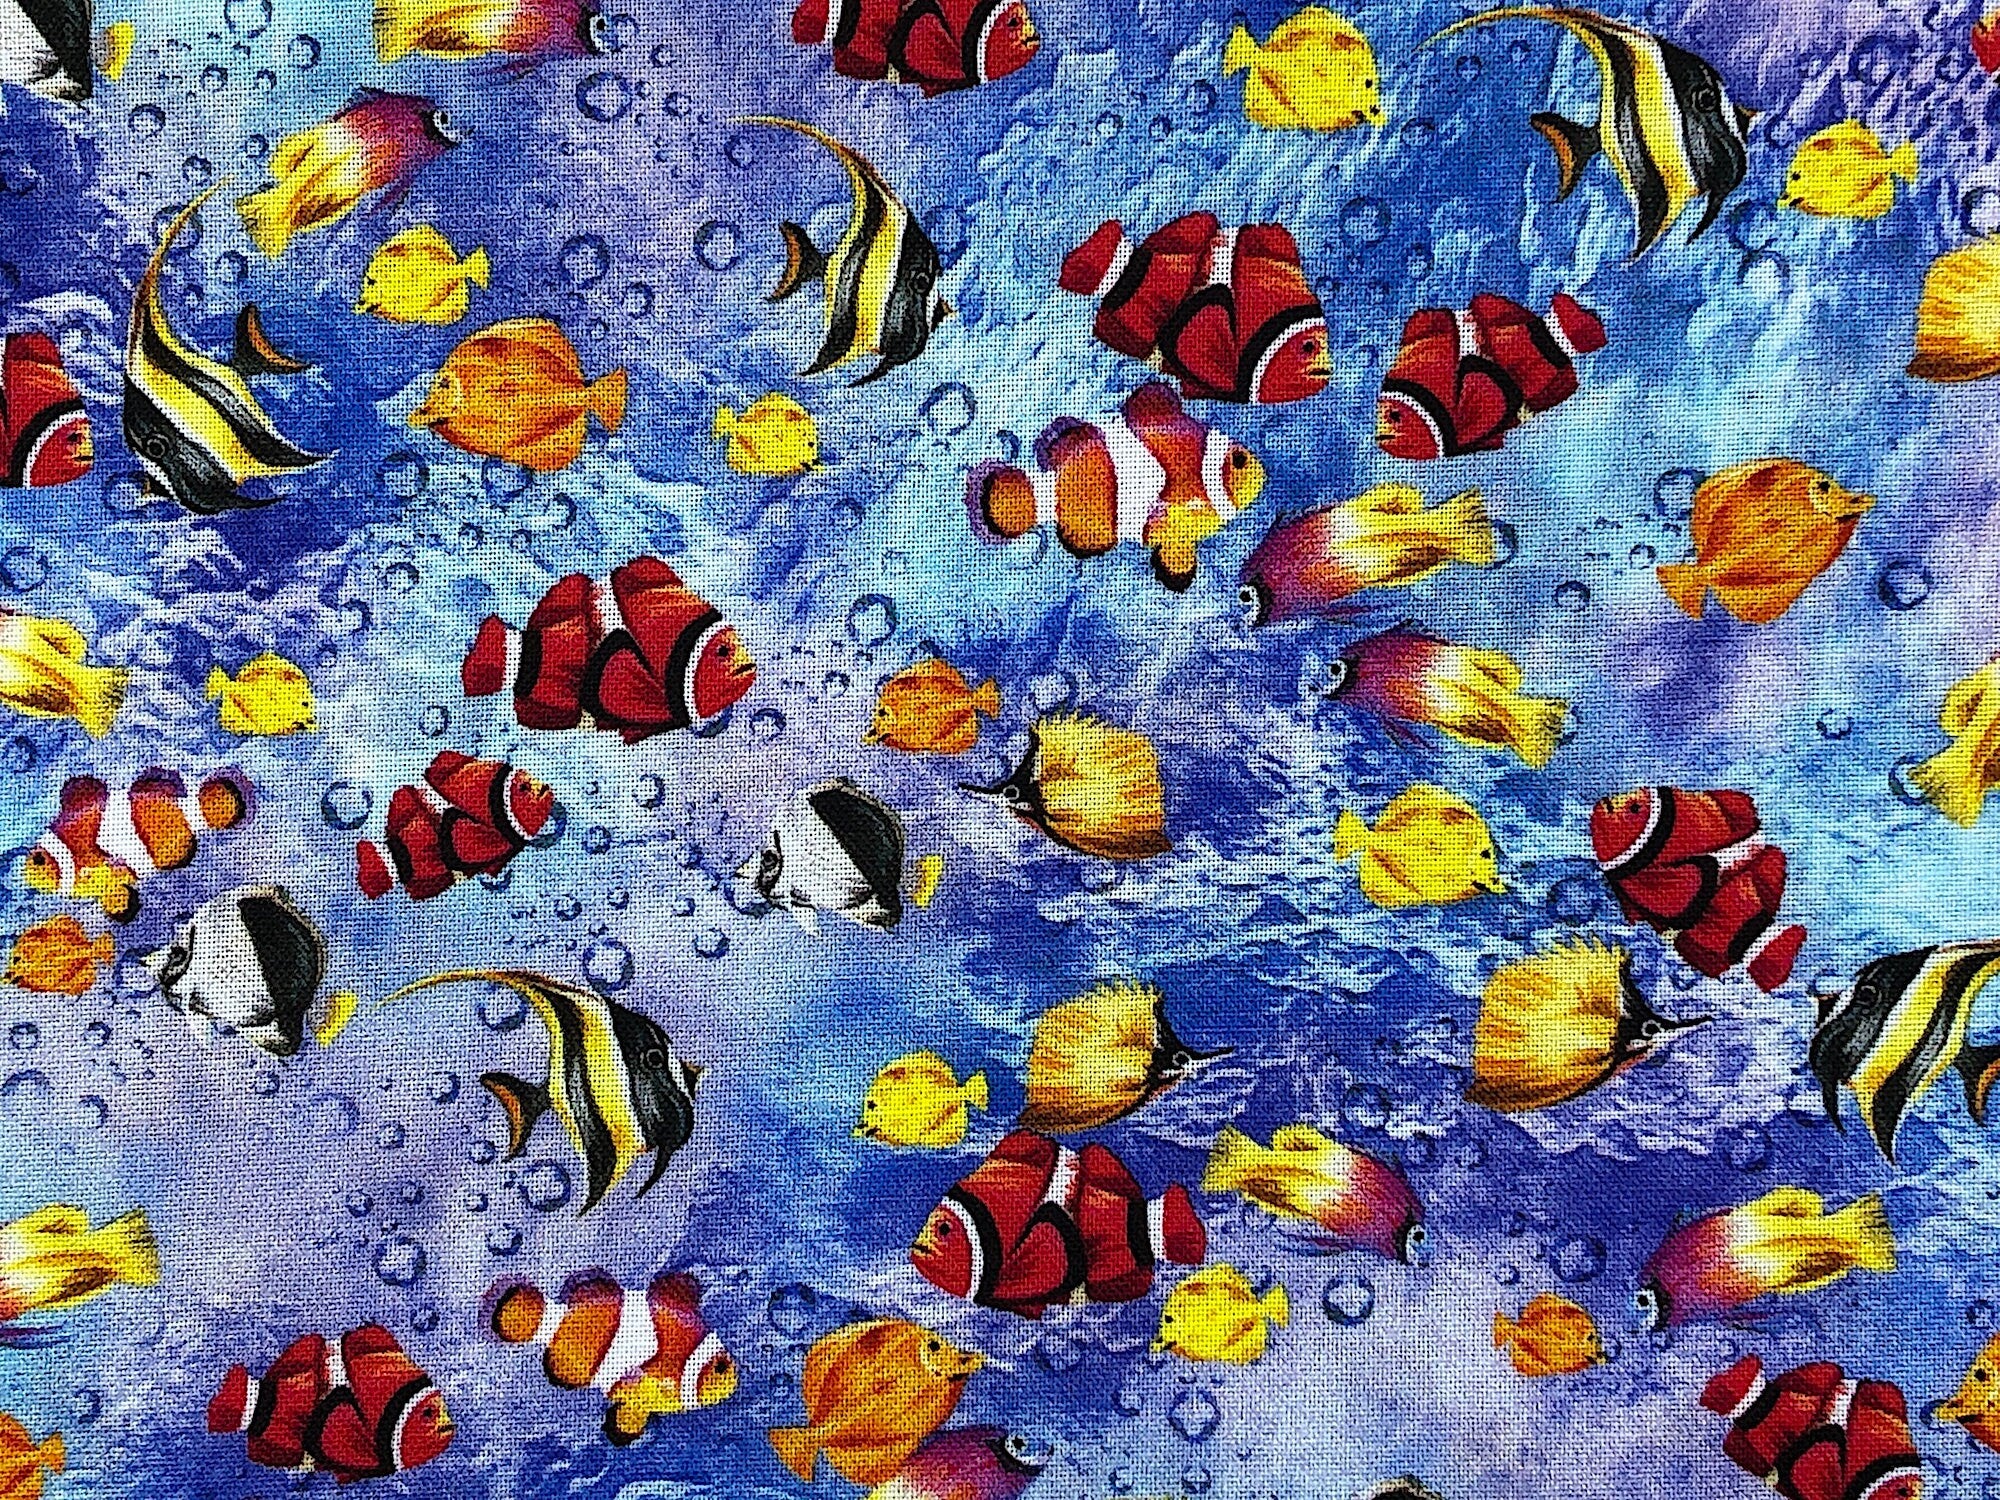 This fabric is part of the Reef Collection and is covered with angel fish, clown fish and more